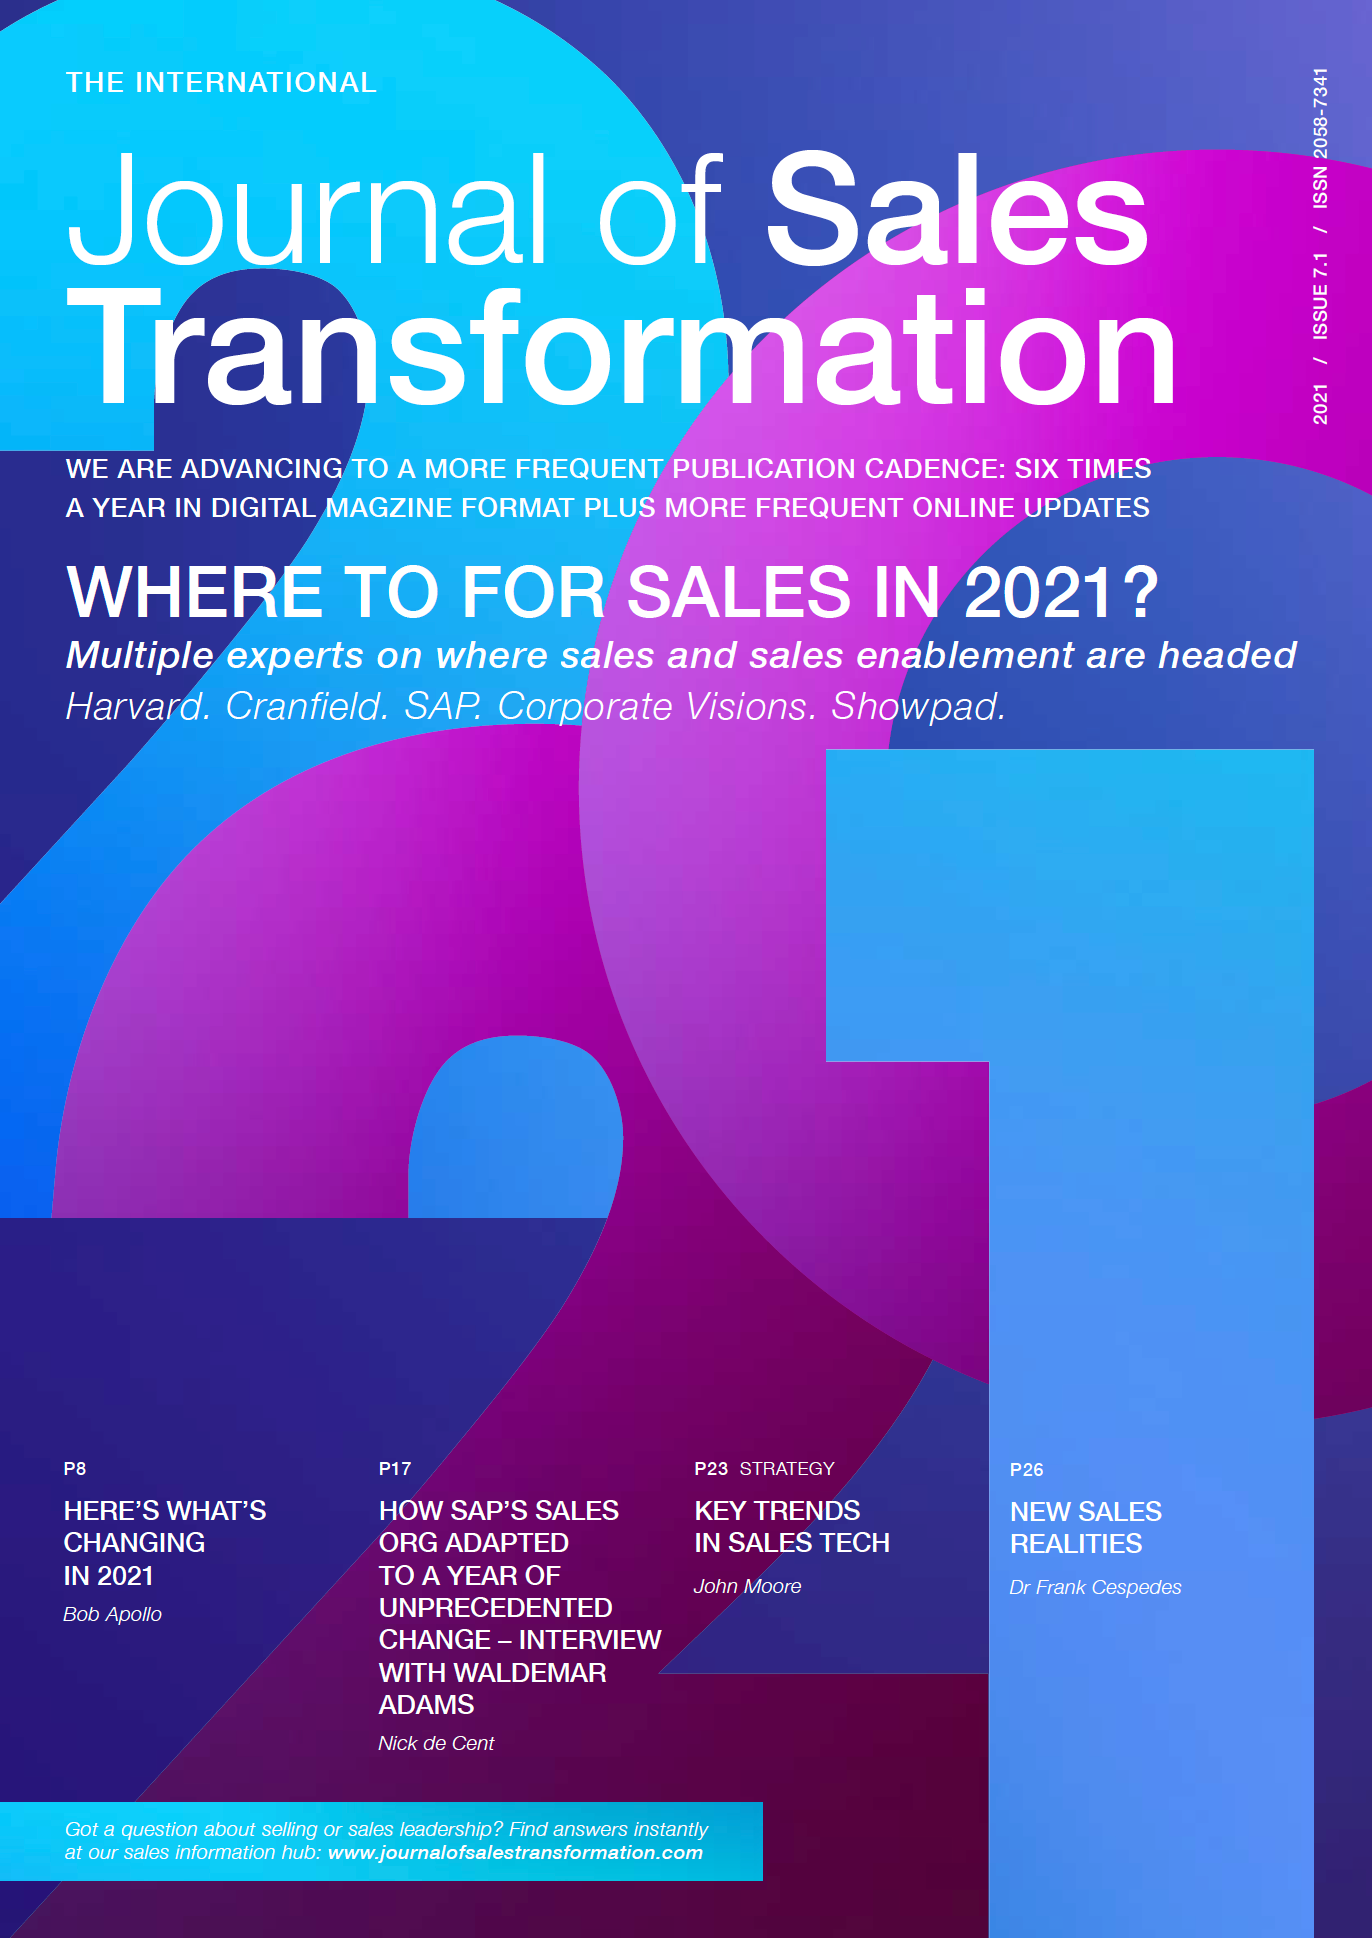 The key issues for B2B sales leaders in 2021